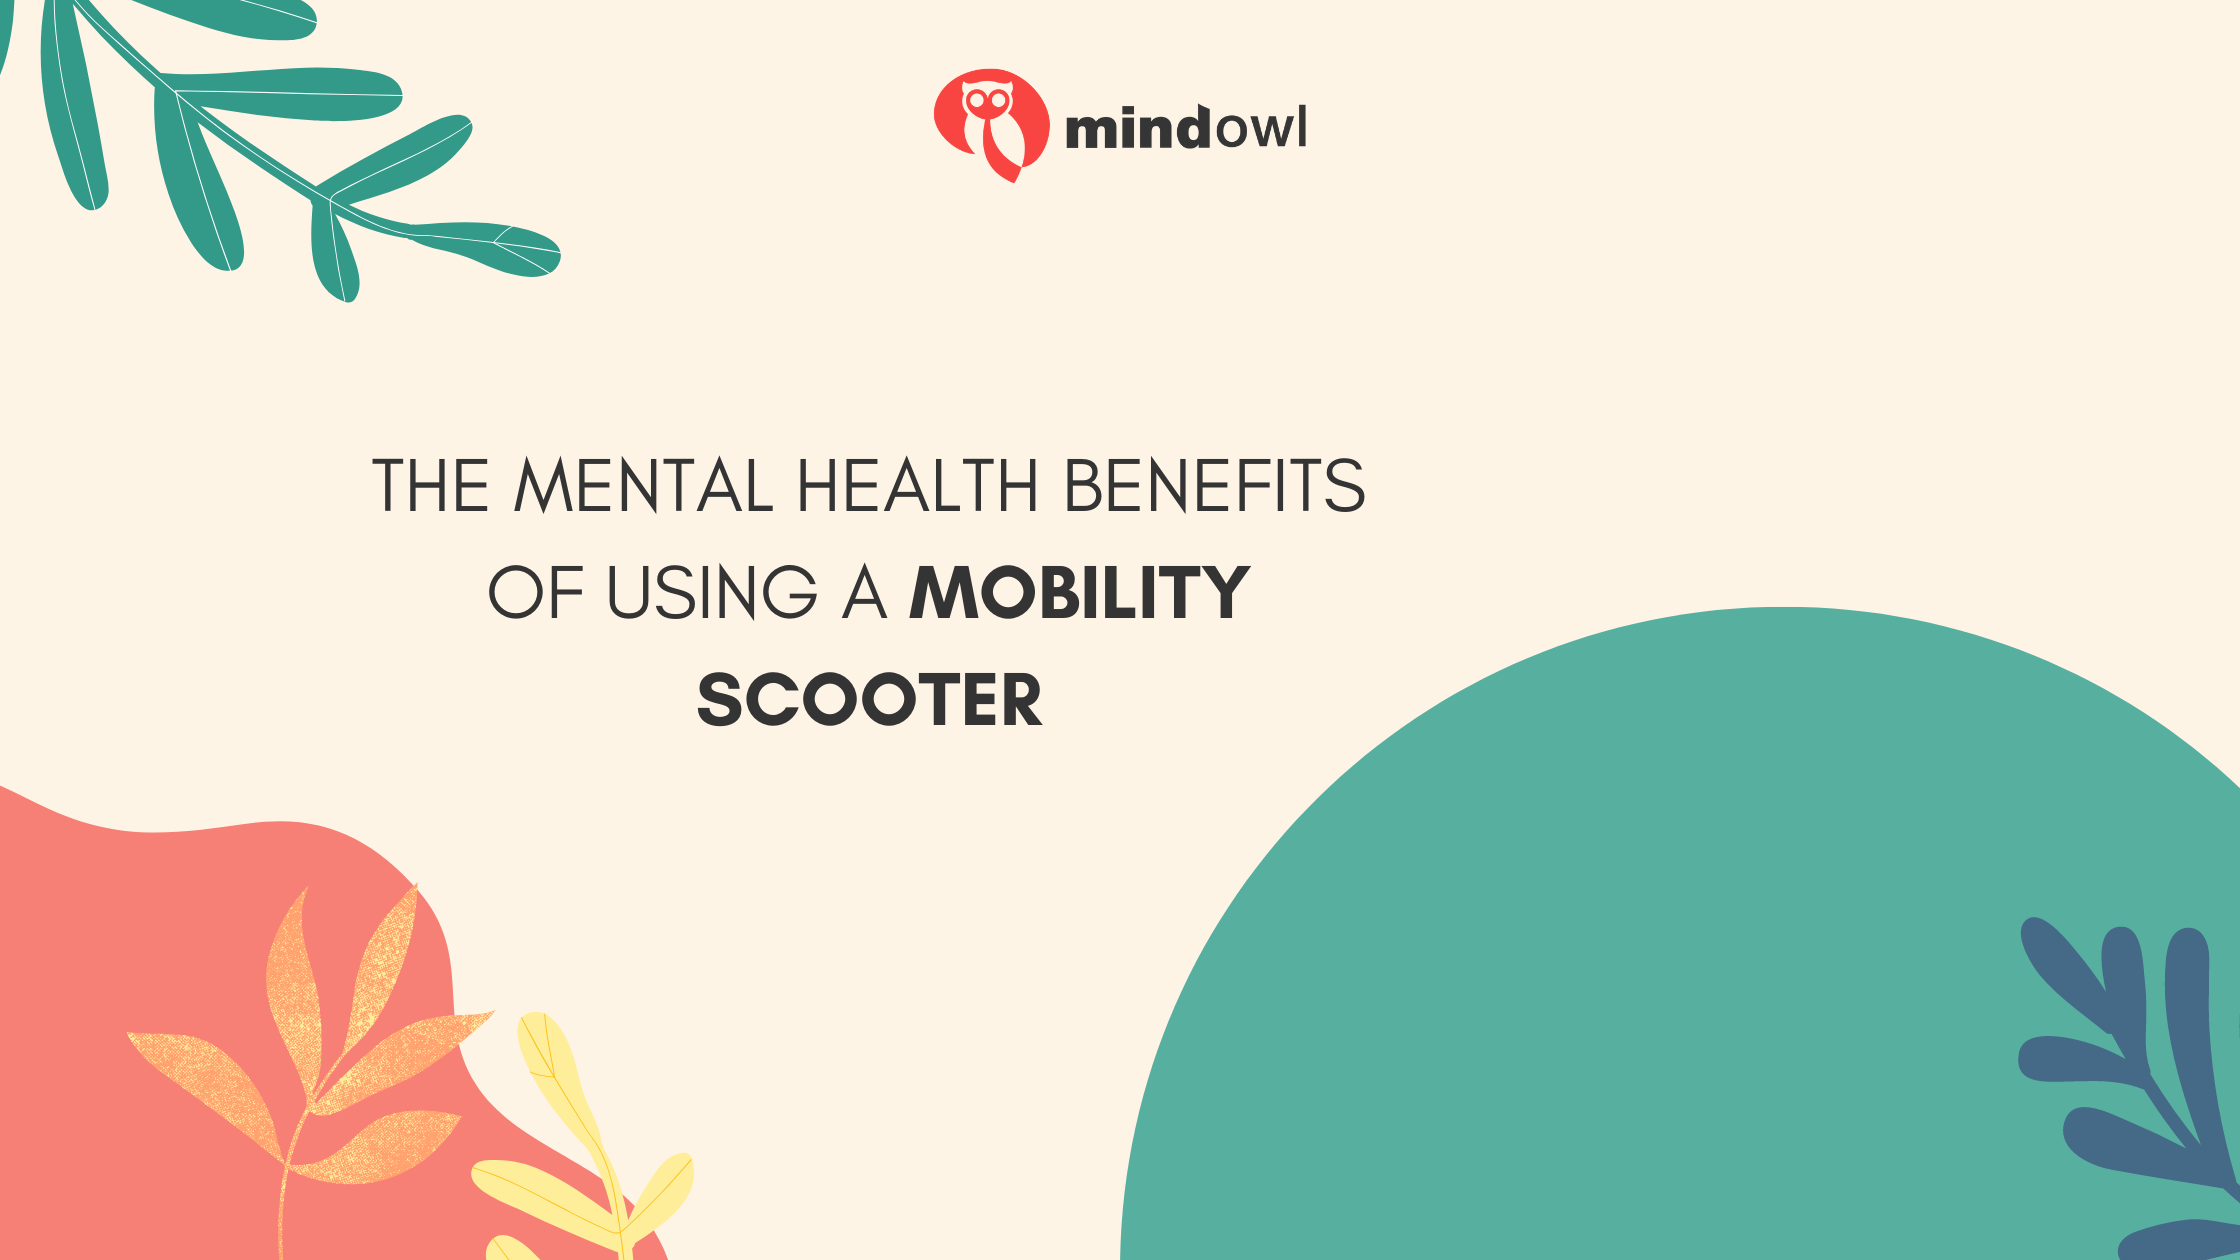 Regaining Freedom And Improving Mood: The Mental Health Benefits Of Using A Mobility Scooter